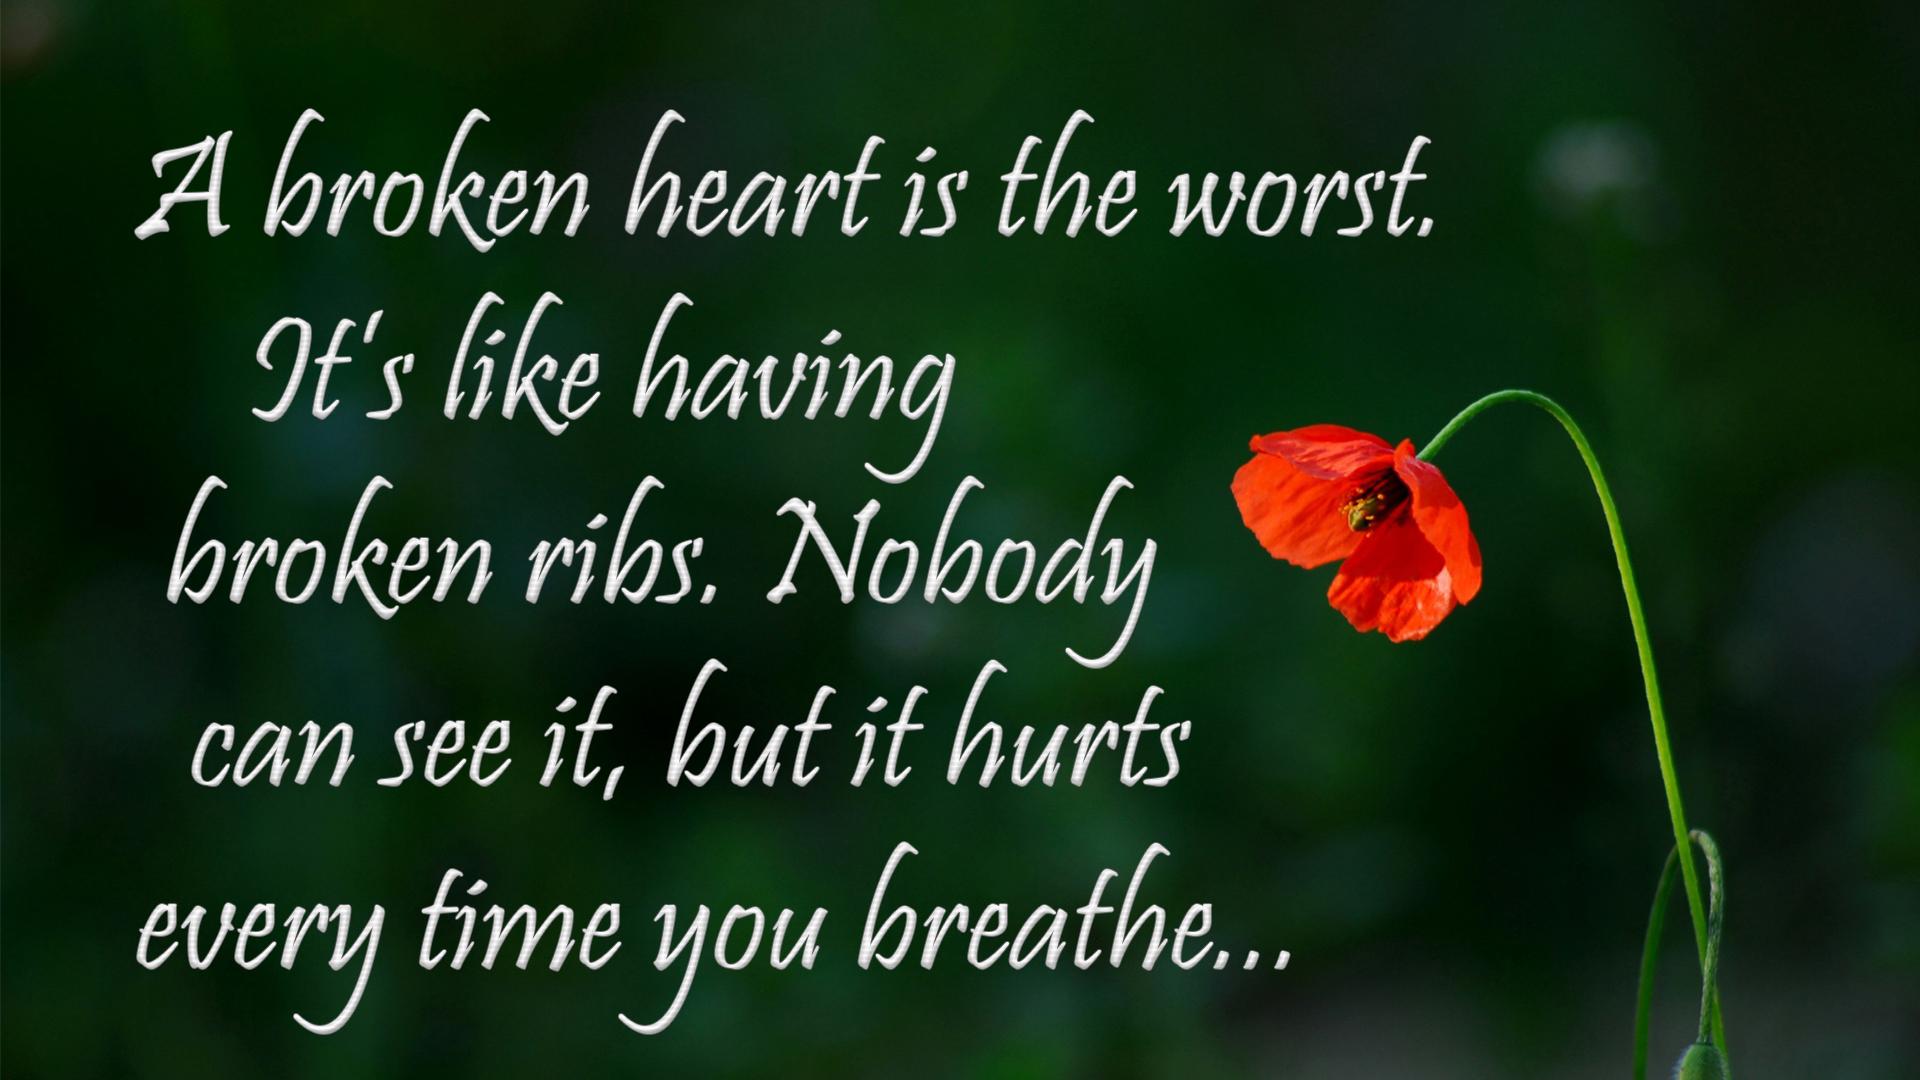 Top Broken Heart Quotes Image & HD Picture Quote